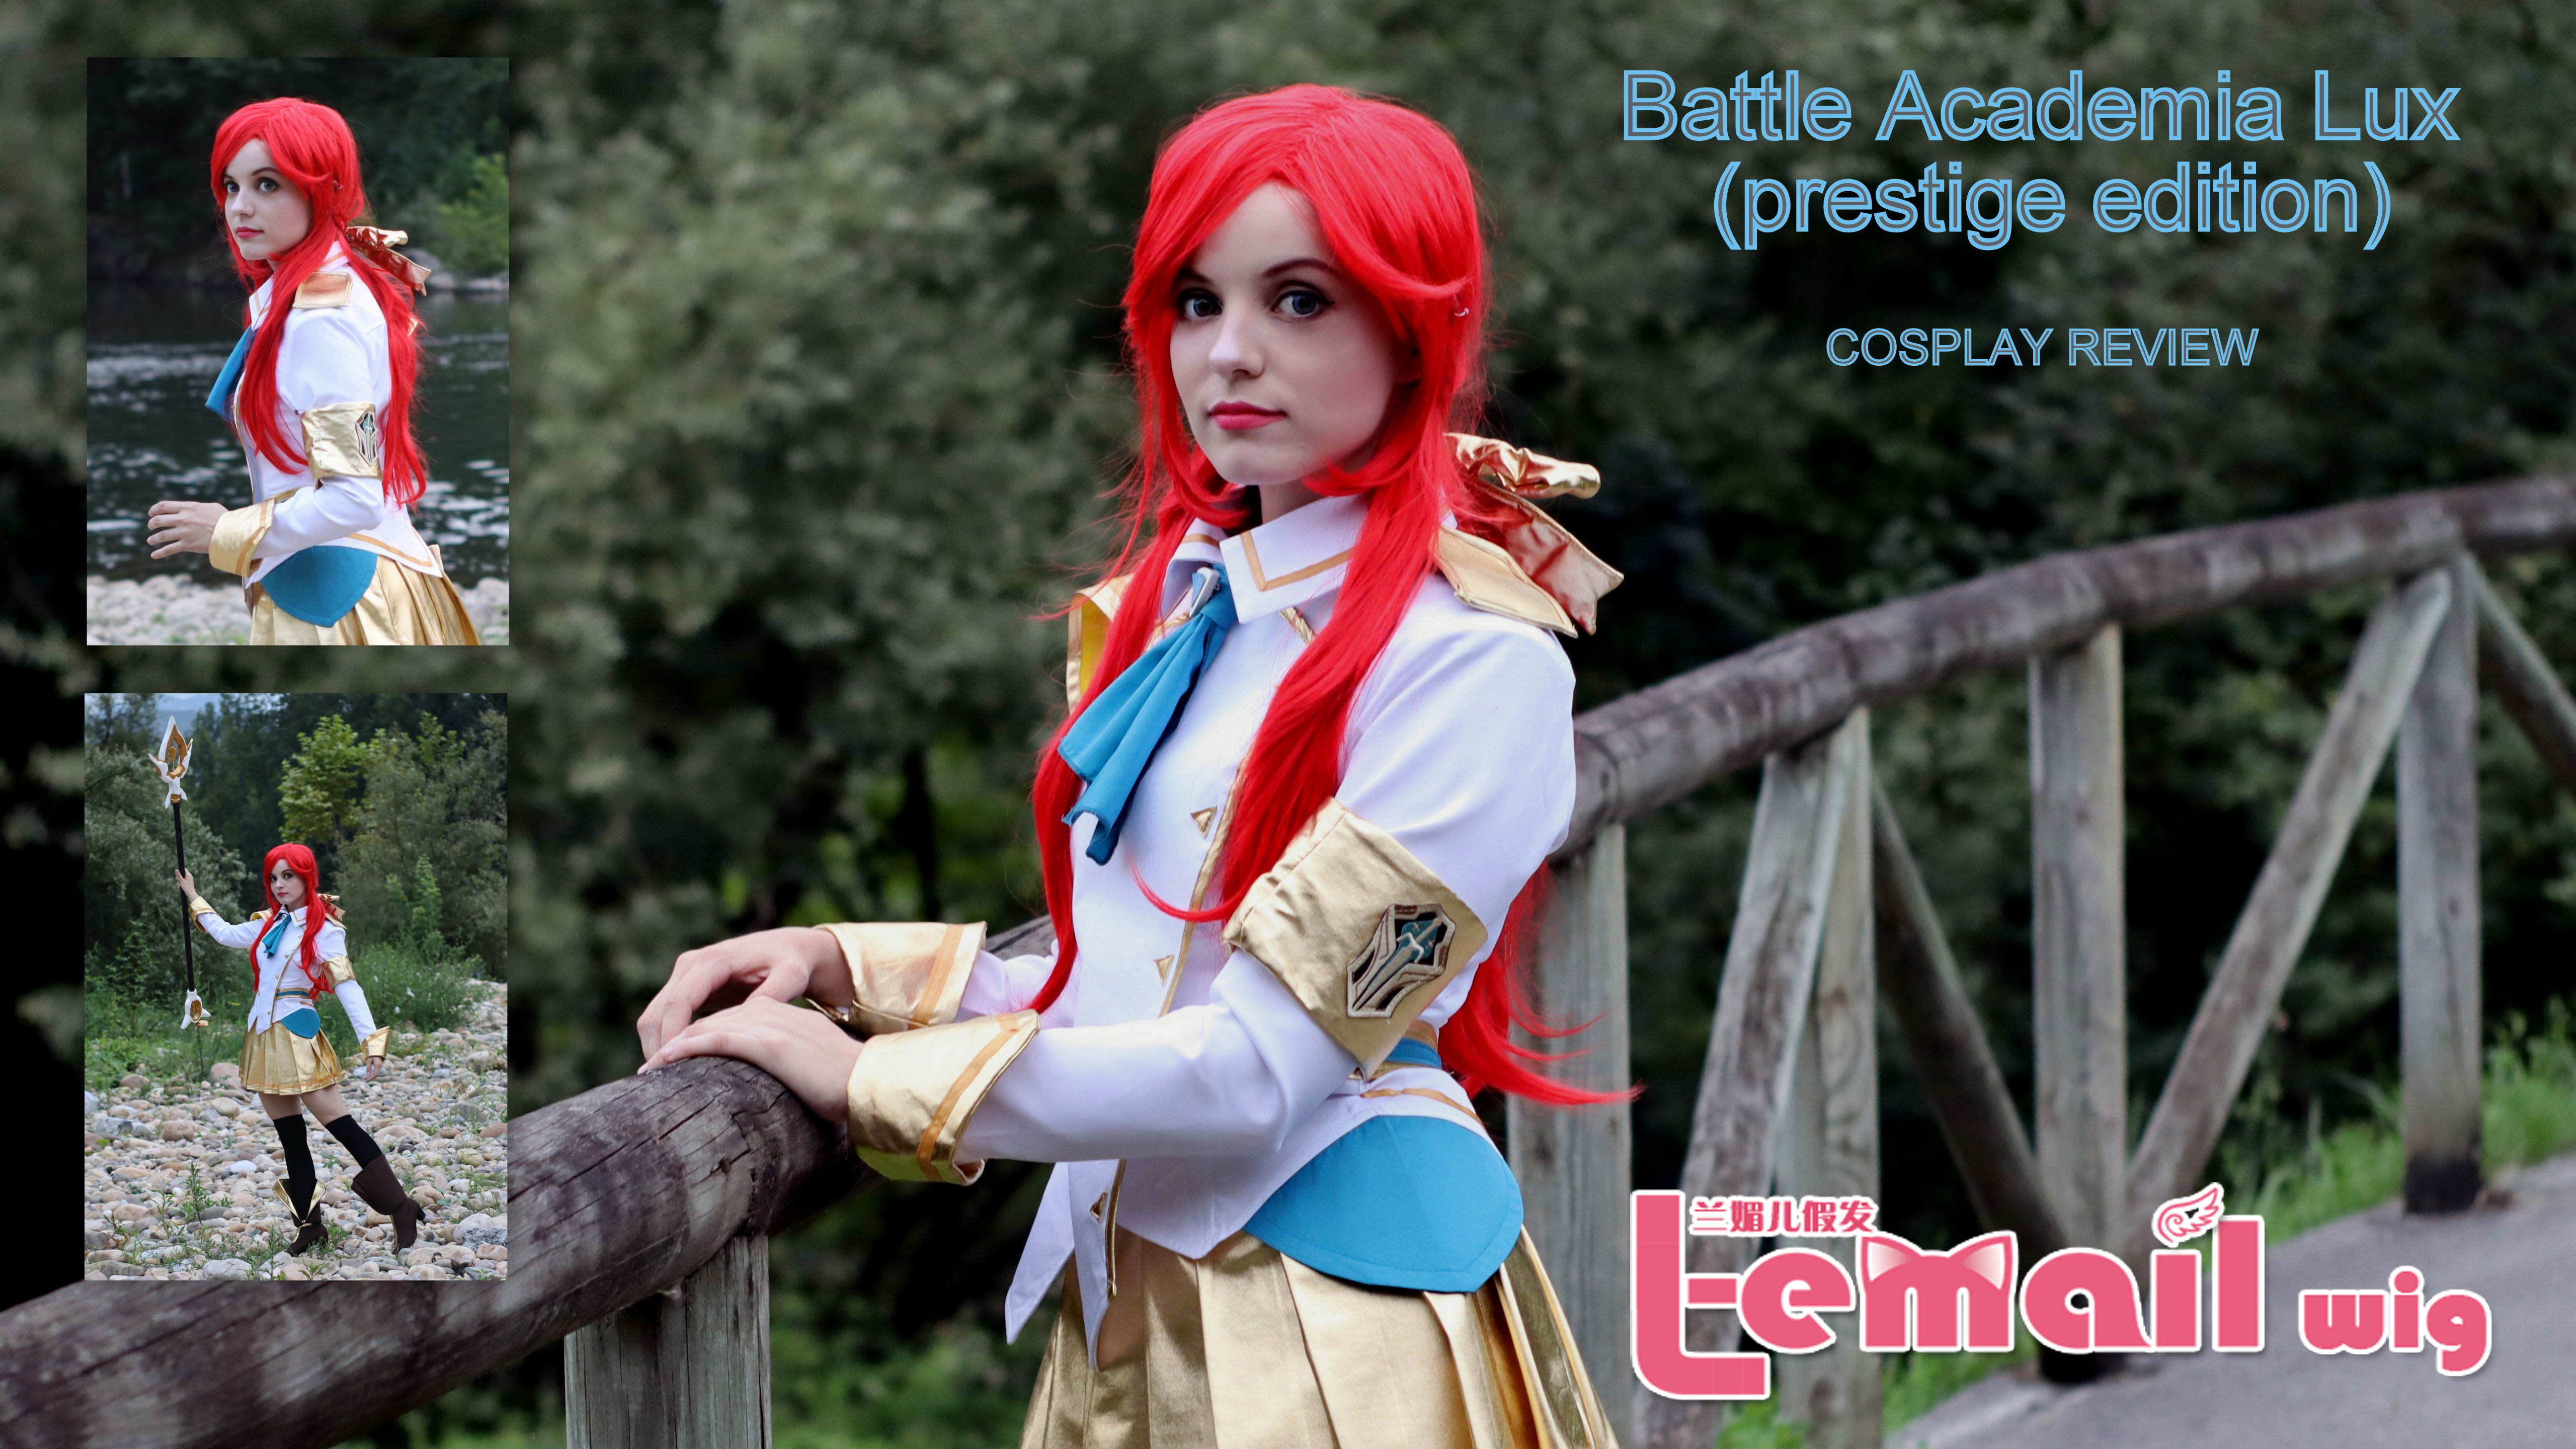 Cosplay Review: Battle Academia Lux(prestige) from L-email Wigs